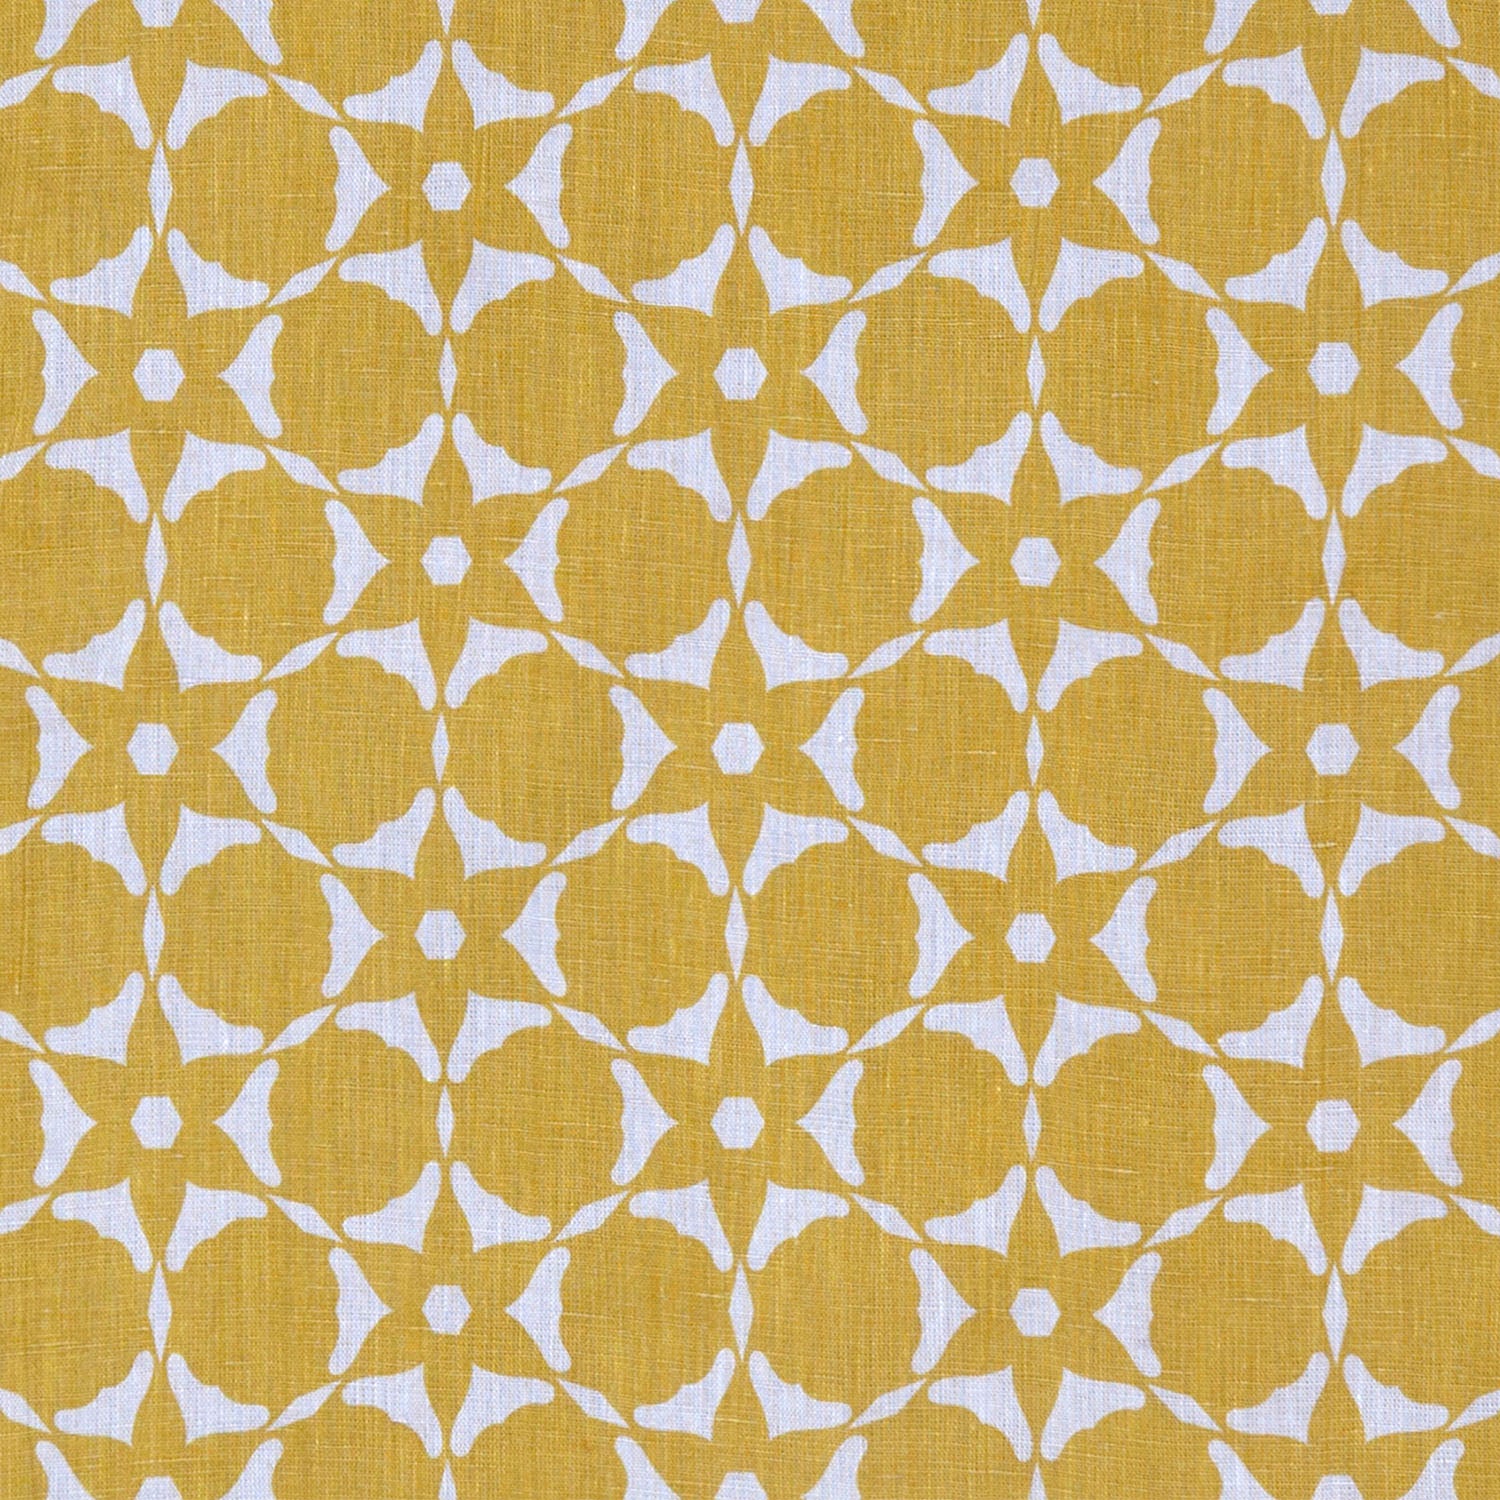 Fabric in a floral lattice print in white on a mustard field.